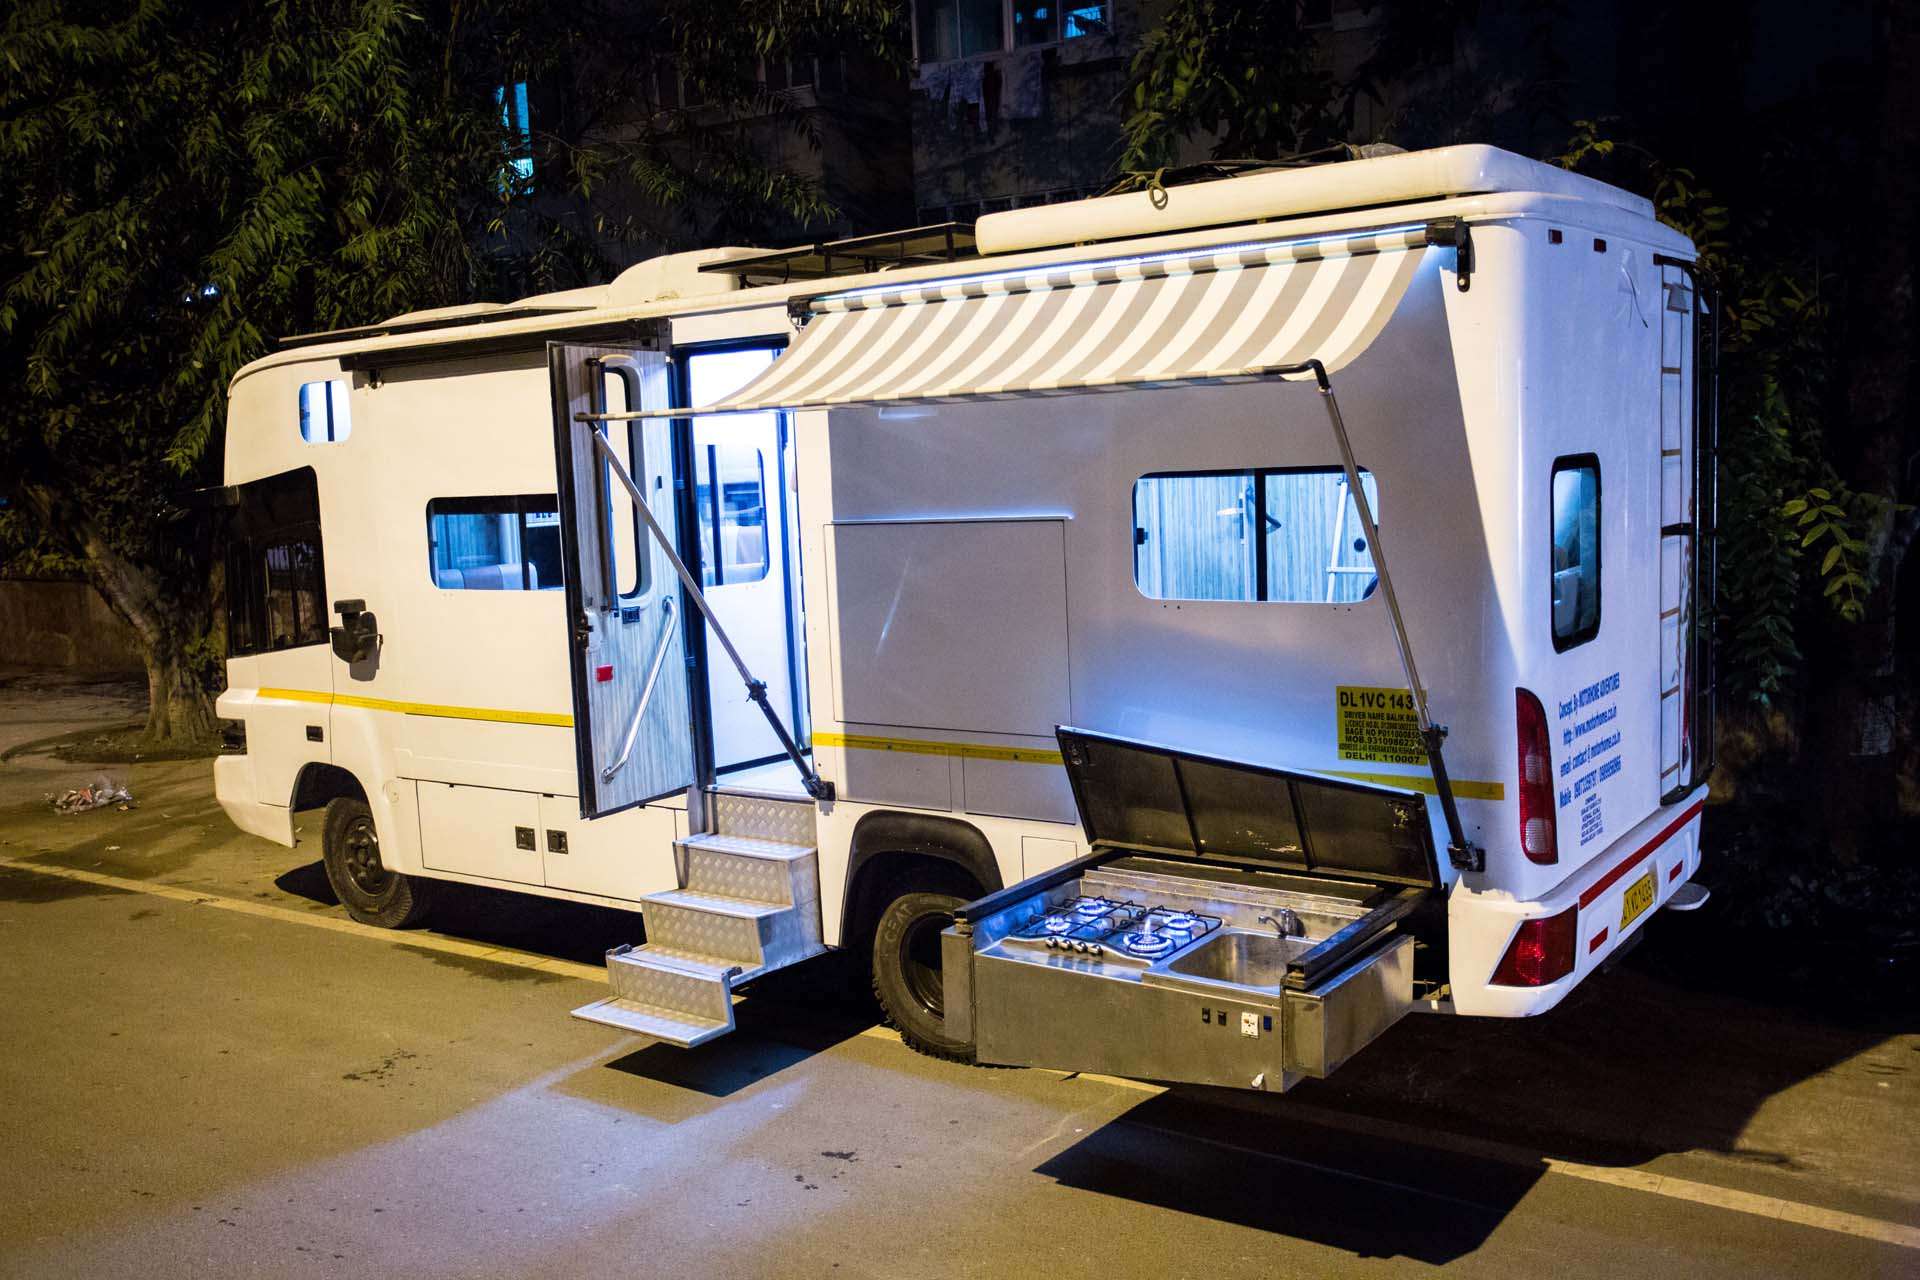 Is a motorhome legal in India?